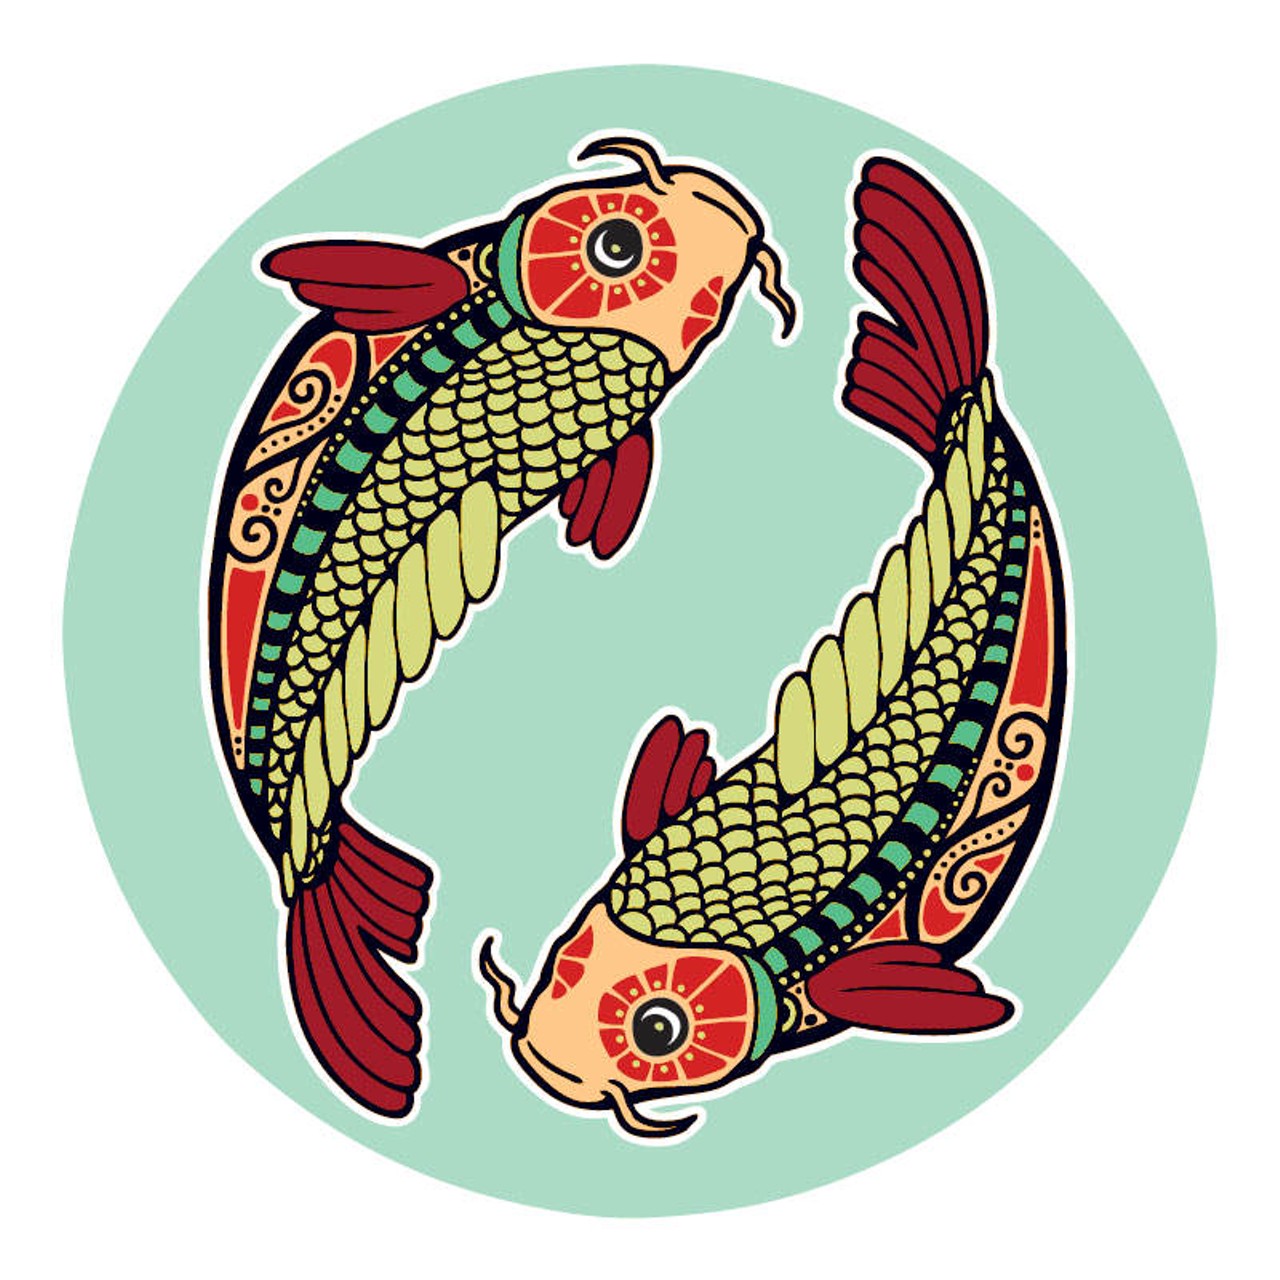 PISCES: Feb. 21 &#150; March 20
You&#146;ve got it made on so many levels it&#146;s hard to see that much of what you&#146;re doing needs to change. Complacency may be comfortable but it doesn&#146;t loan any excitement to your life. Whatever you&#146;ve achieved in terms of stability can be used to further things that could make a difference for you and for others. It&#146;s time to reevaluate your purpose without needing to limit your sense of what&#146;s possible for you at this stage of the game. As you sit back and ponder who you want to be when you grow up, keep in mind that it&#146;s never too late to start all over again.